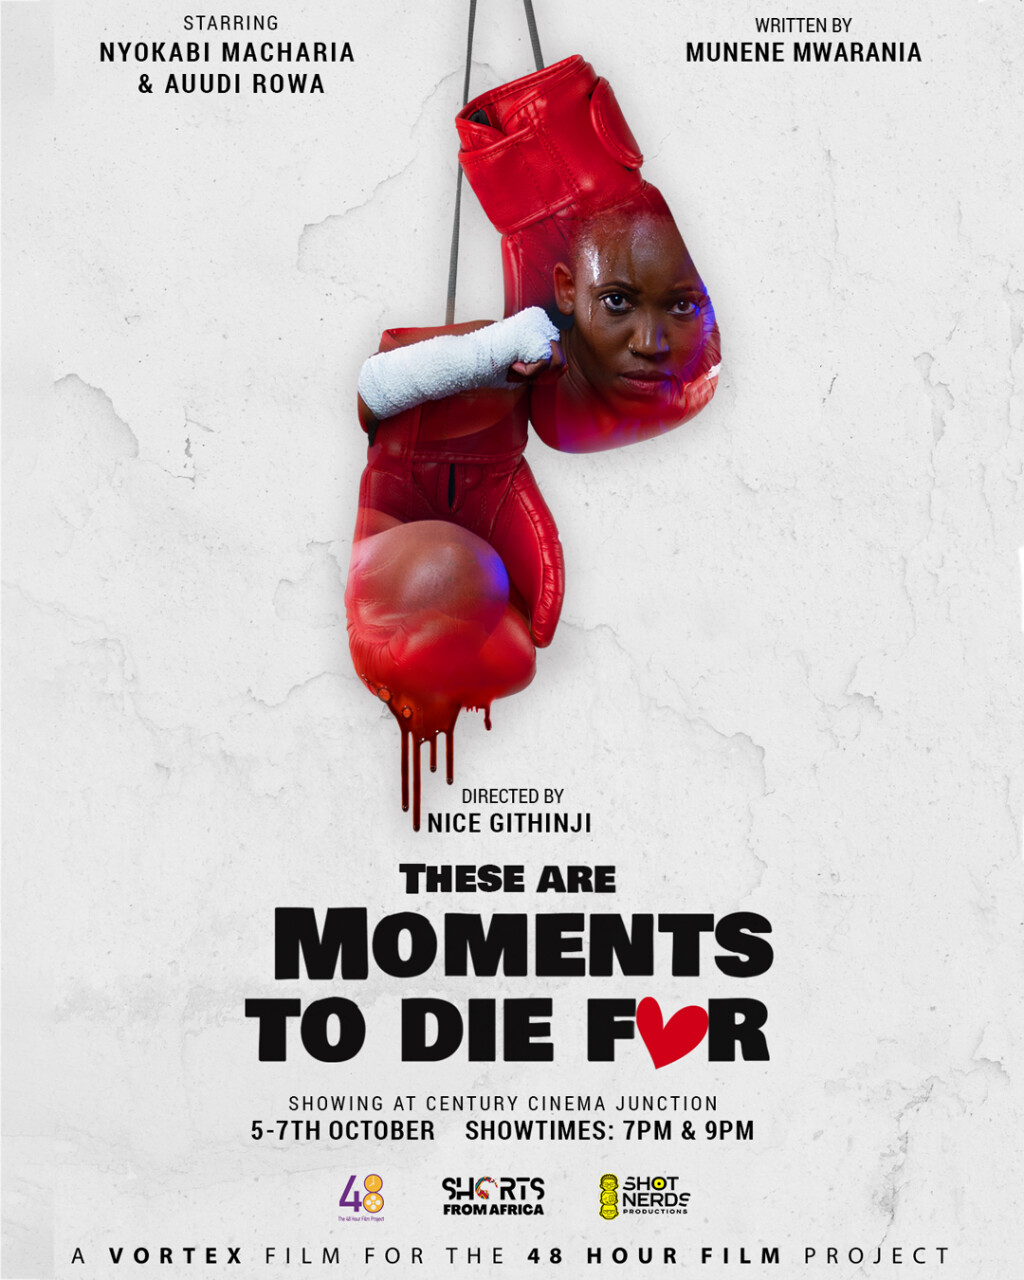 Filmposter for These moments are to die for